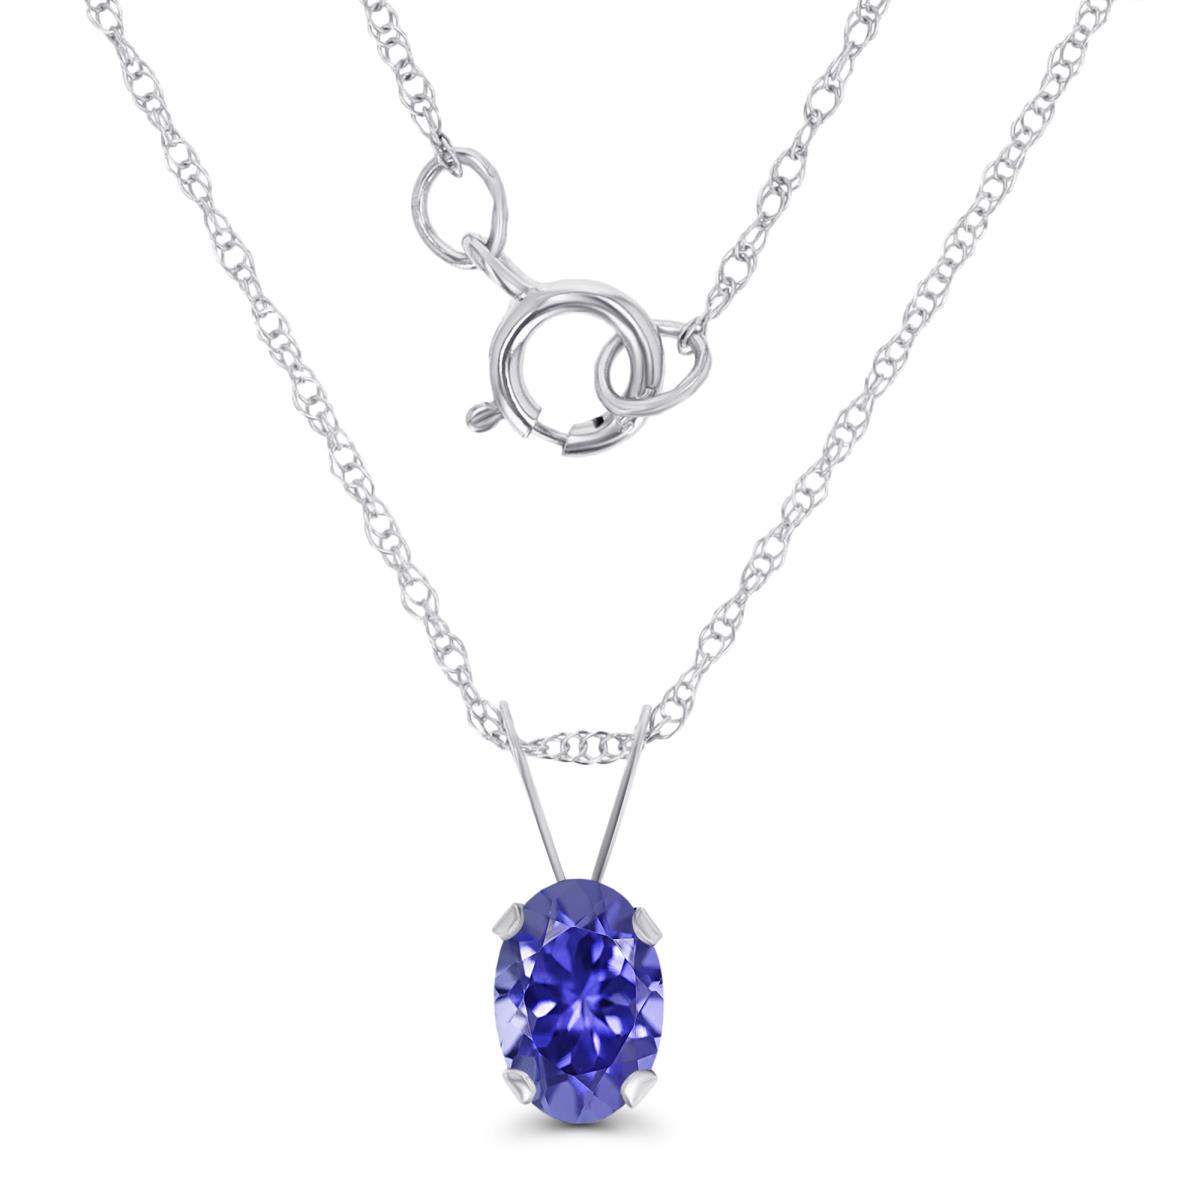 10K White Gold 6x4mm Oval Tanzanite 18" Rope Chain Necklace